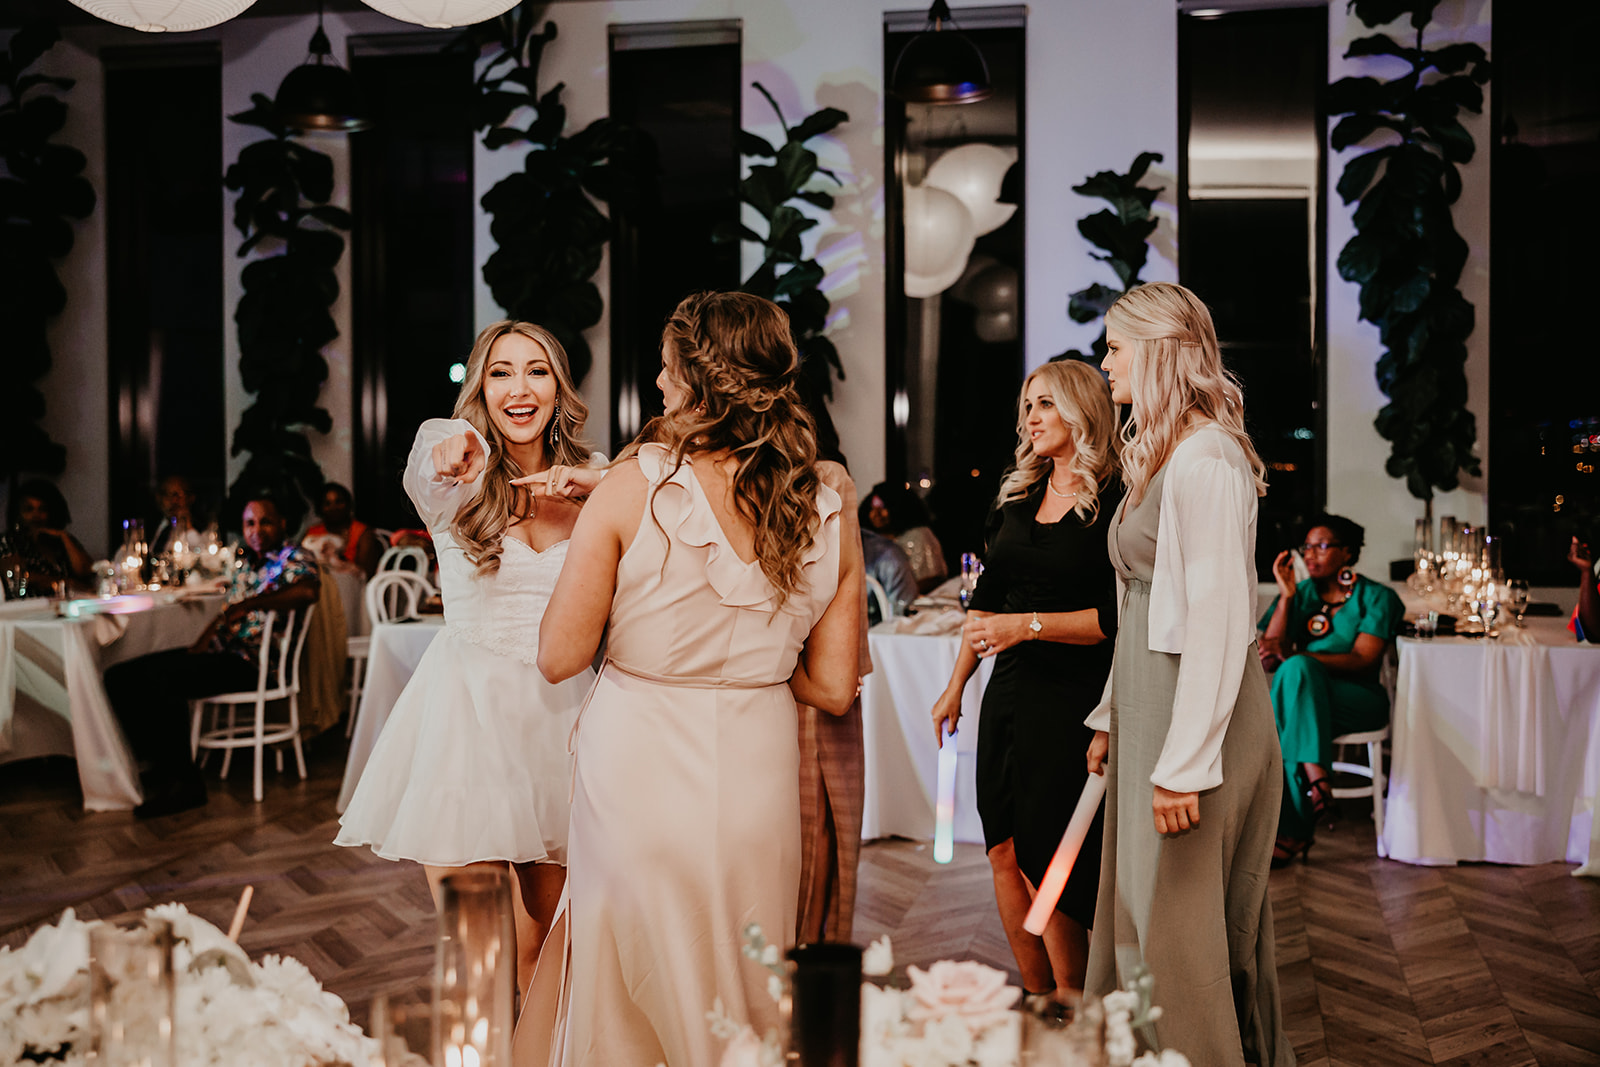 Joyful wedding guests dancing and celebrating at The Lantern Room in Cleveland, Ohio - capturing the energy of the event